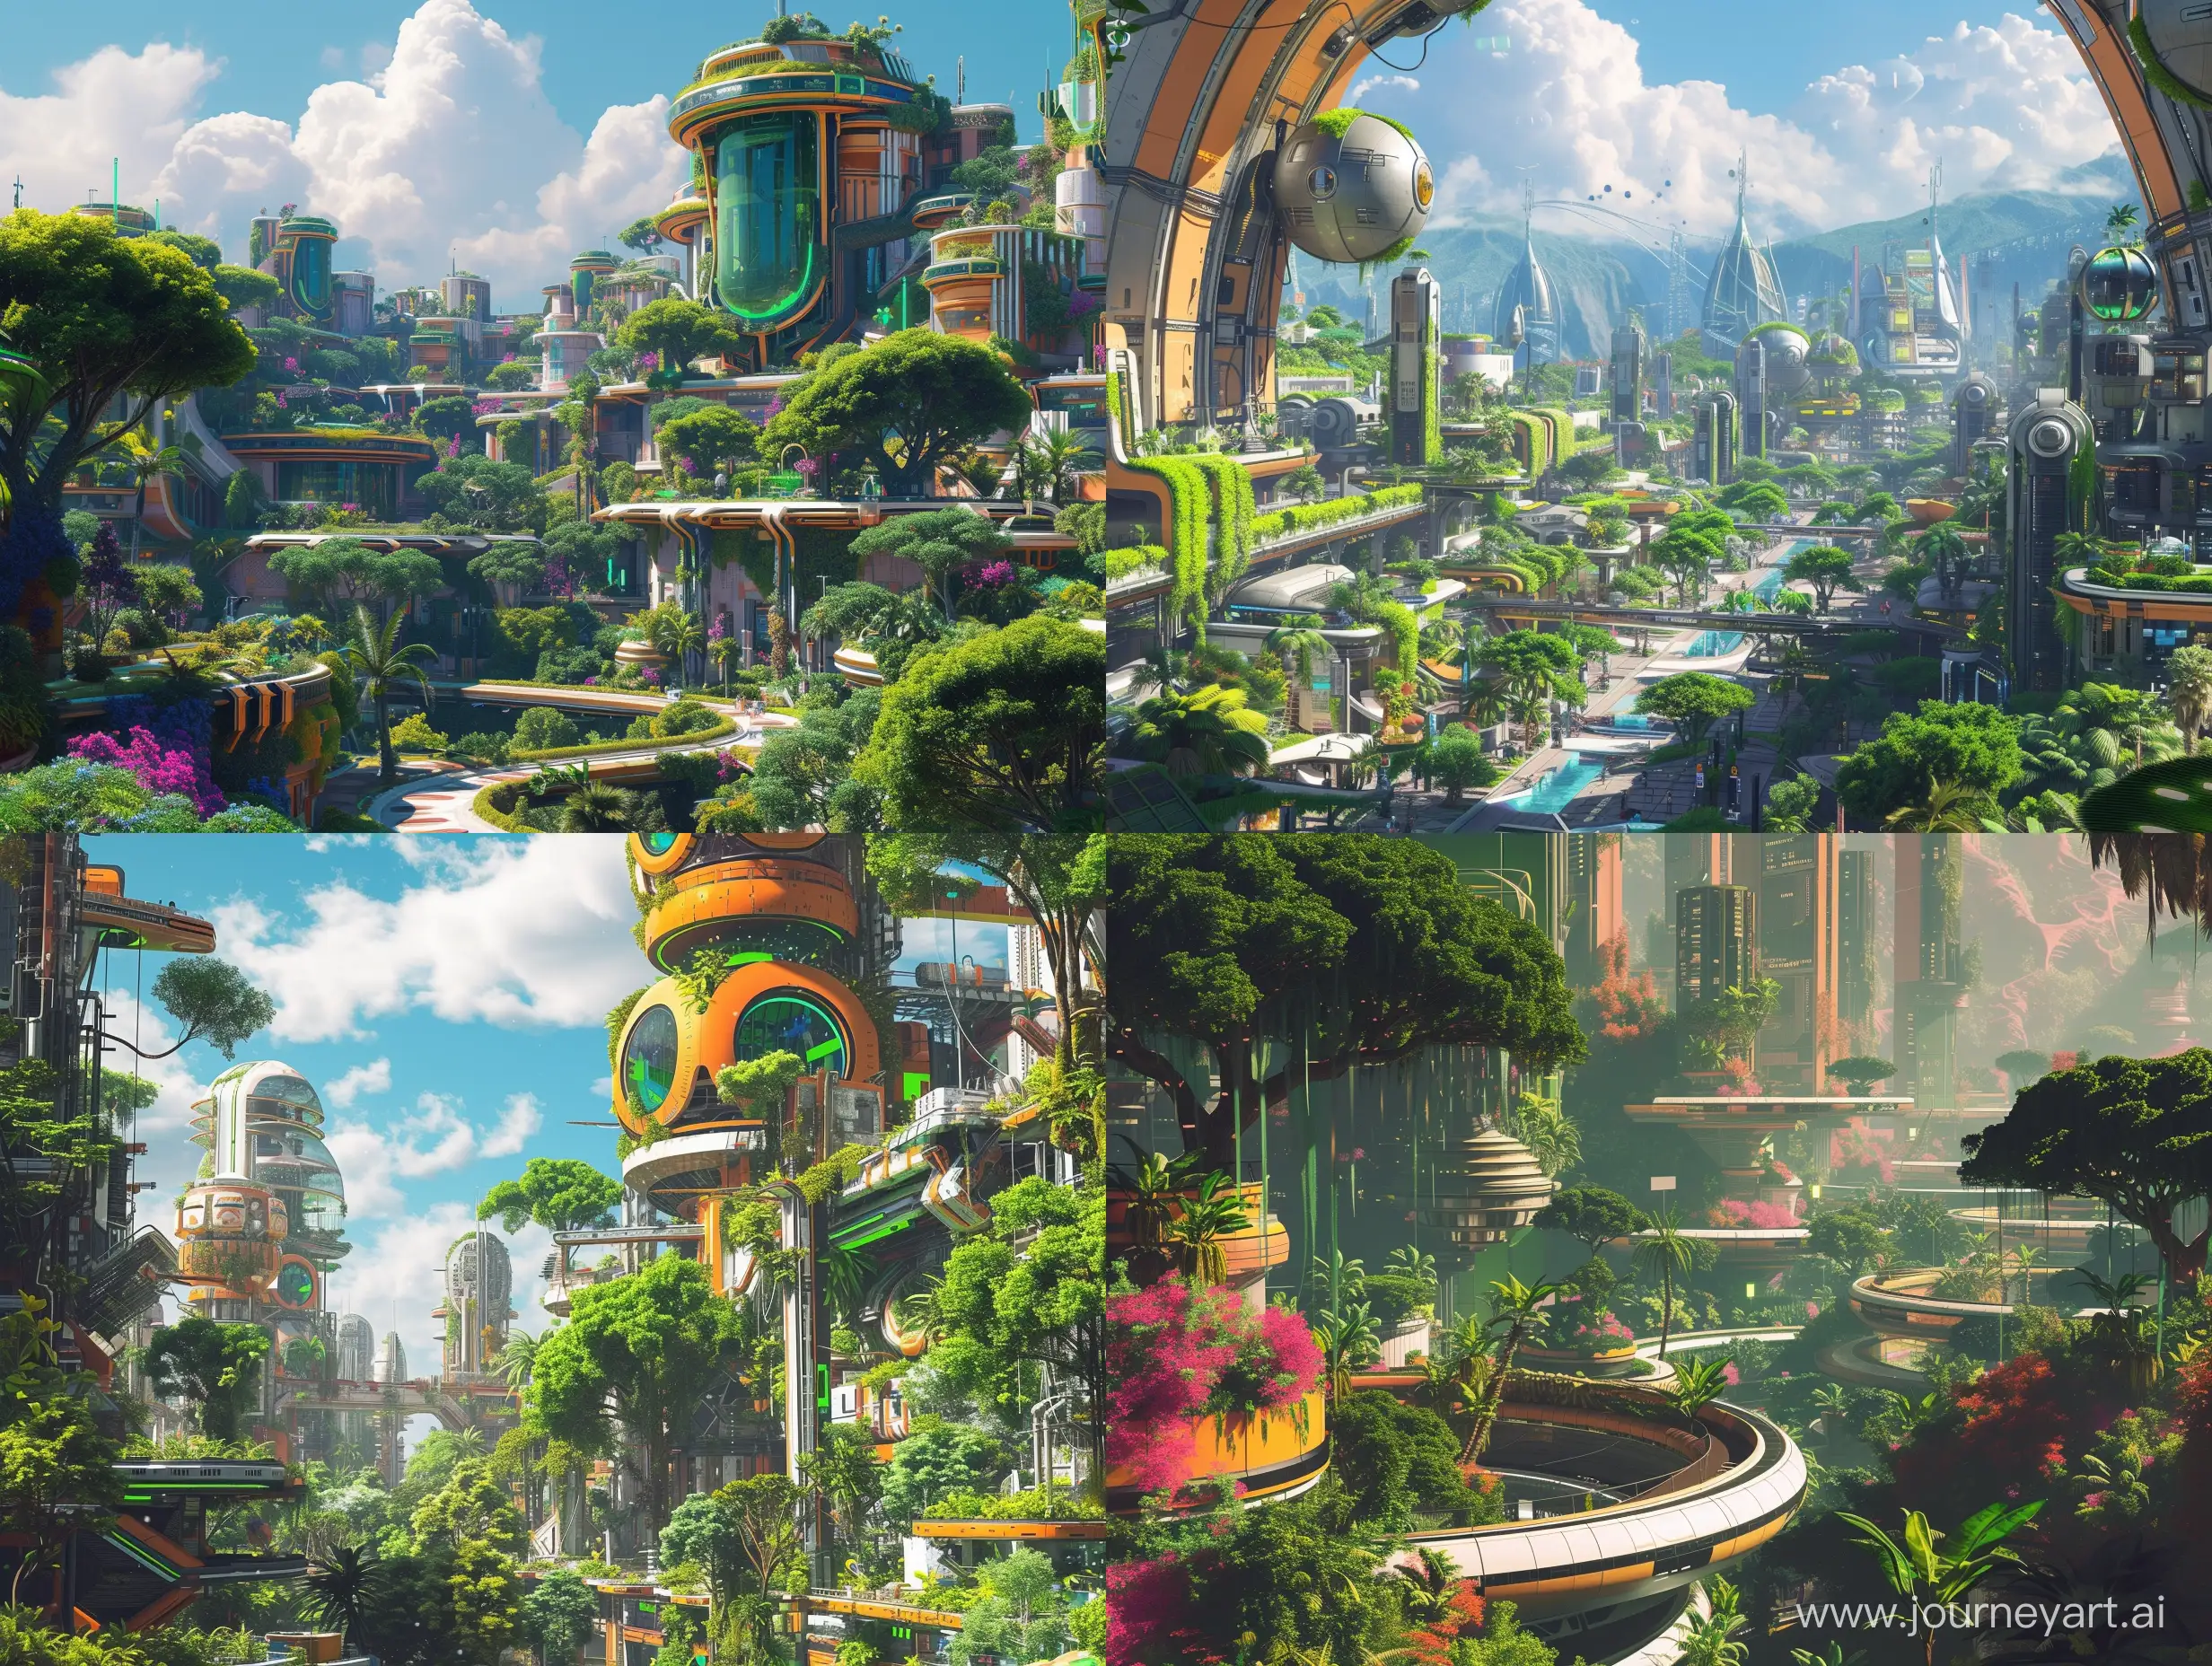 A vibrant, futuristic city with lush greenery, inspired by the artistic styles of Roger Dean and Ralph McQuarrie. It features a retro science fiction art style with colorful and surreal elements. --v 6 --ar 4:3 --no 293